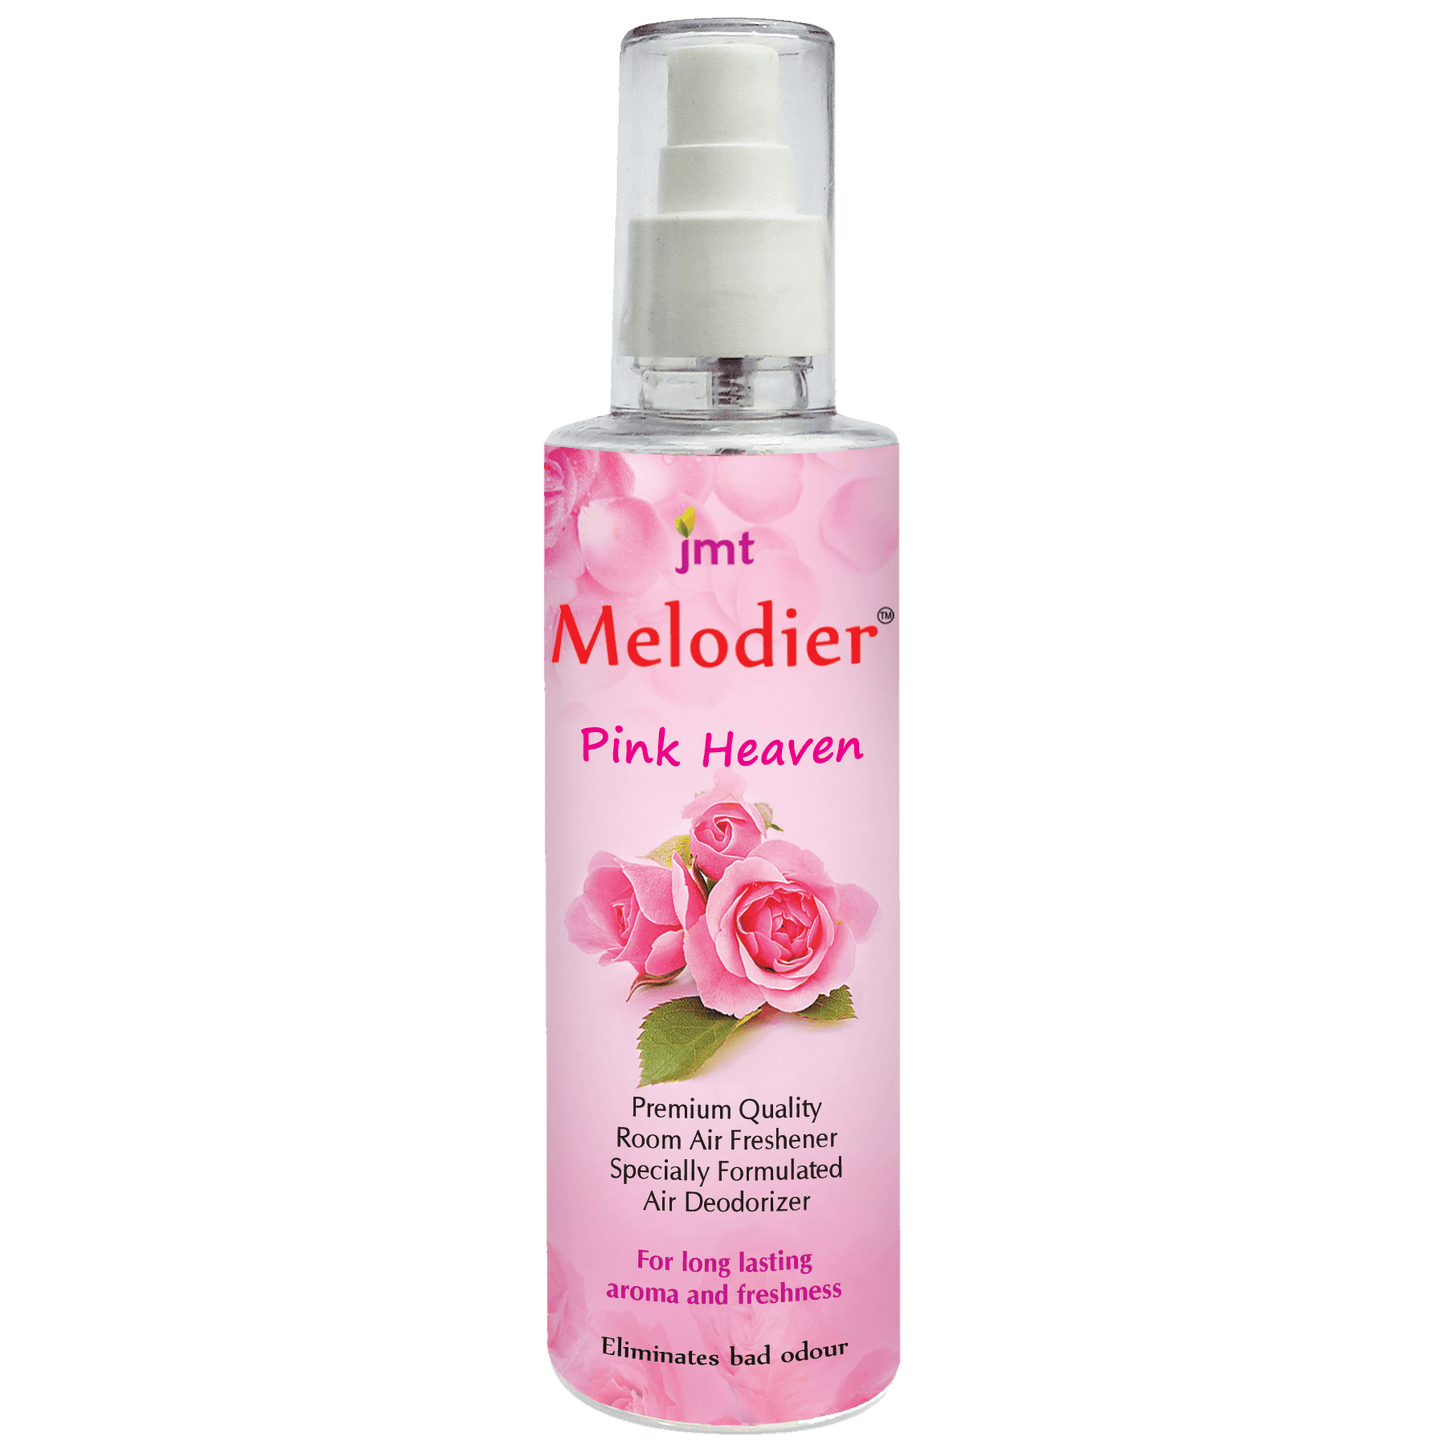 Buy Three, Get One Free - Pack of 4 x 200ml Melodier Room Air Freshener and A True Deodorizer